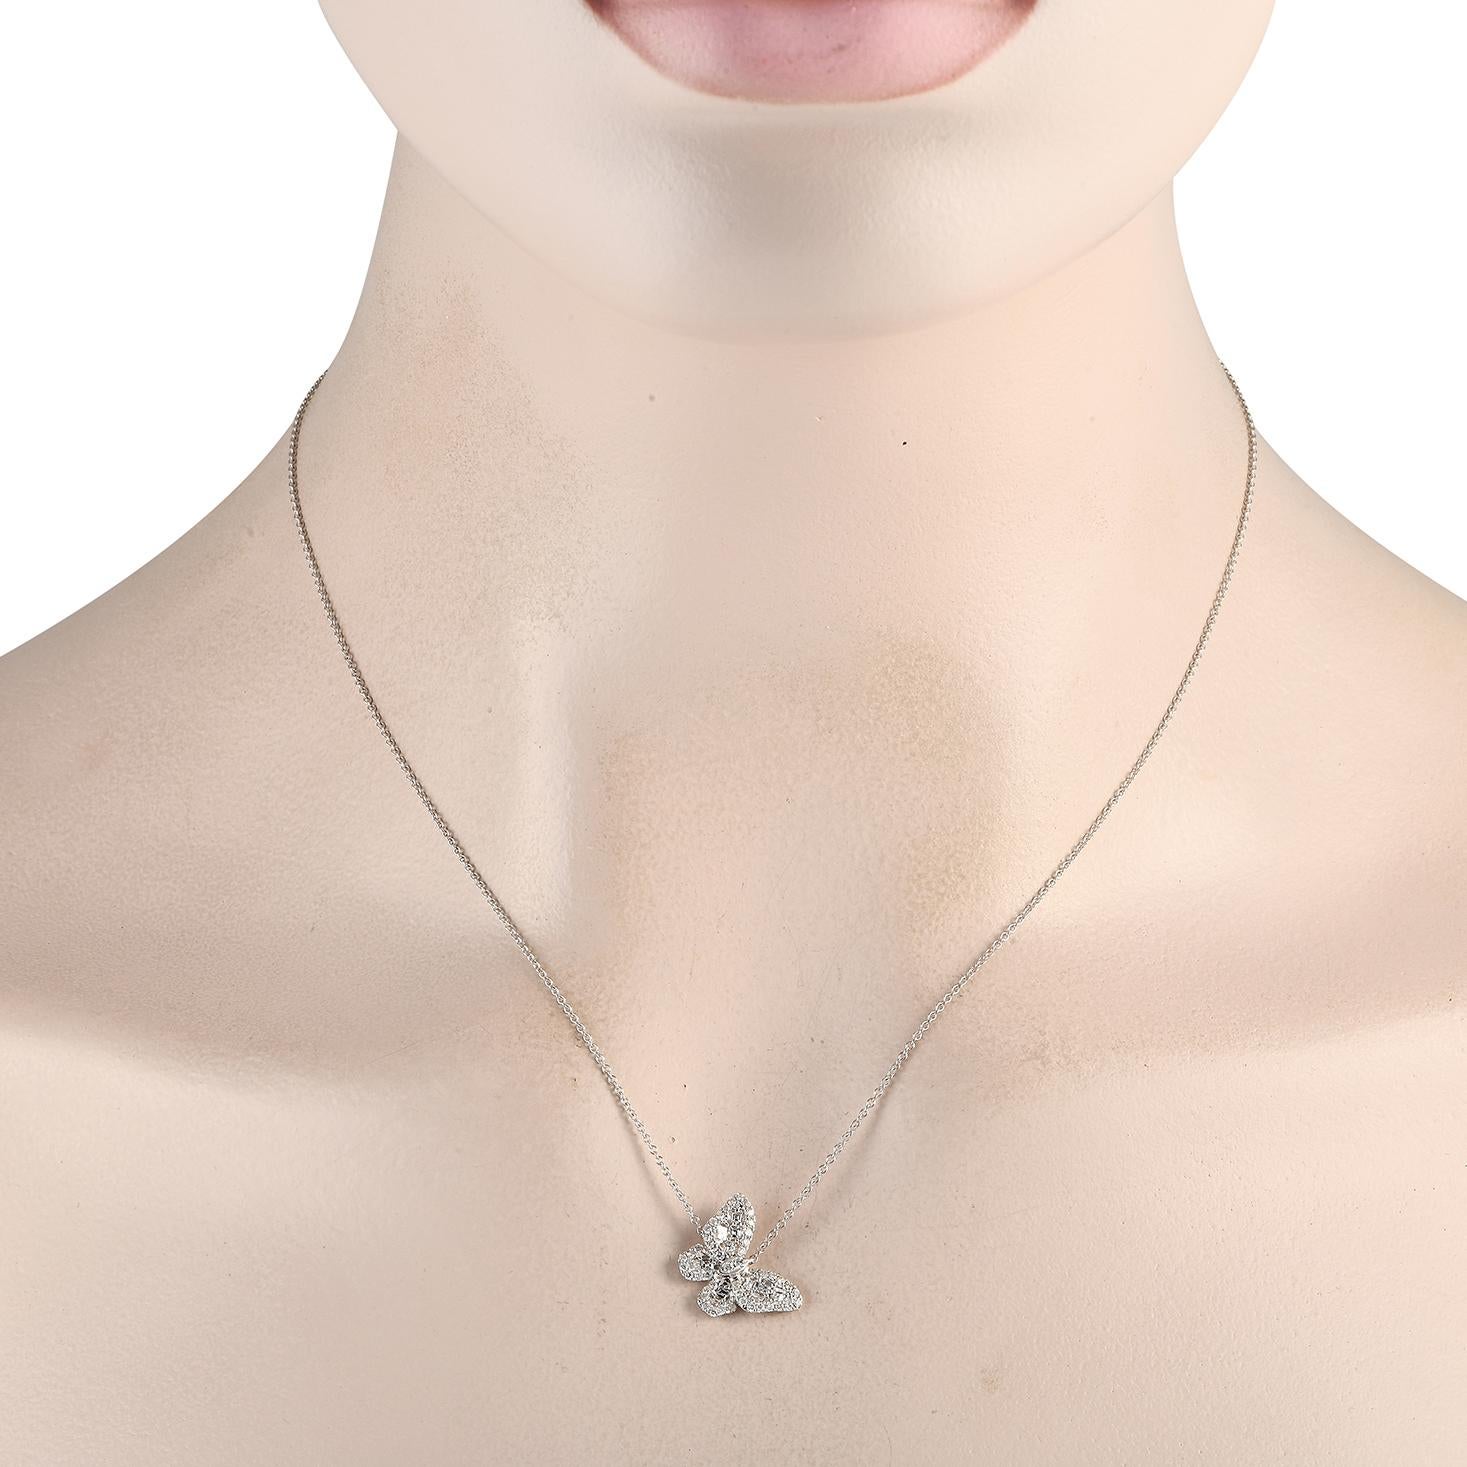 A shimmering butterfly pendant measuring 0.65 round serves as a stunning focal point on this impeccably crafted 18K white gold necklace. Suspended from a delicate 18 chain, its covered in asscher-cut diamonds totaling 0.30 carats and additional